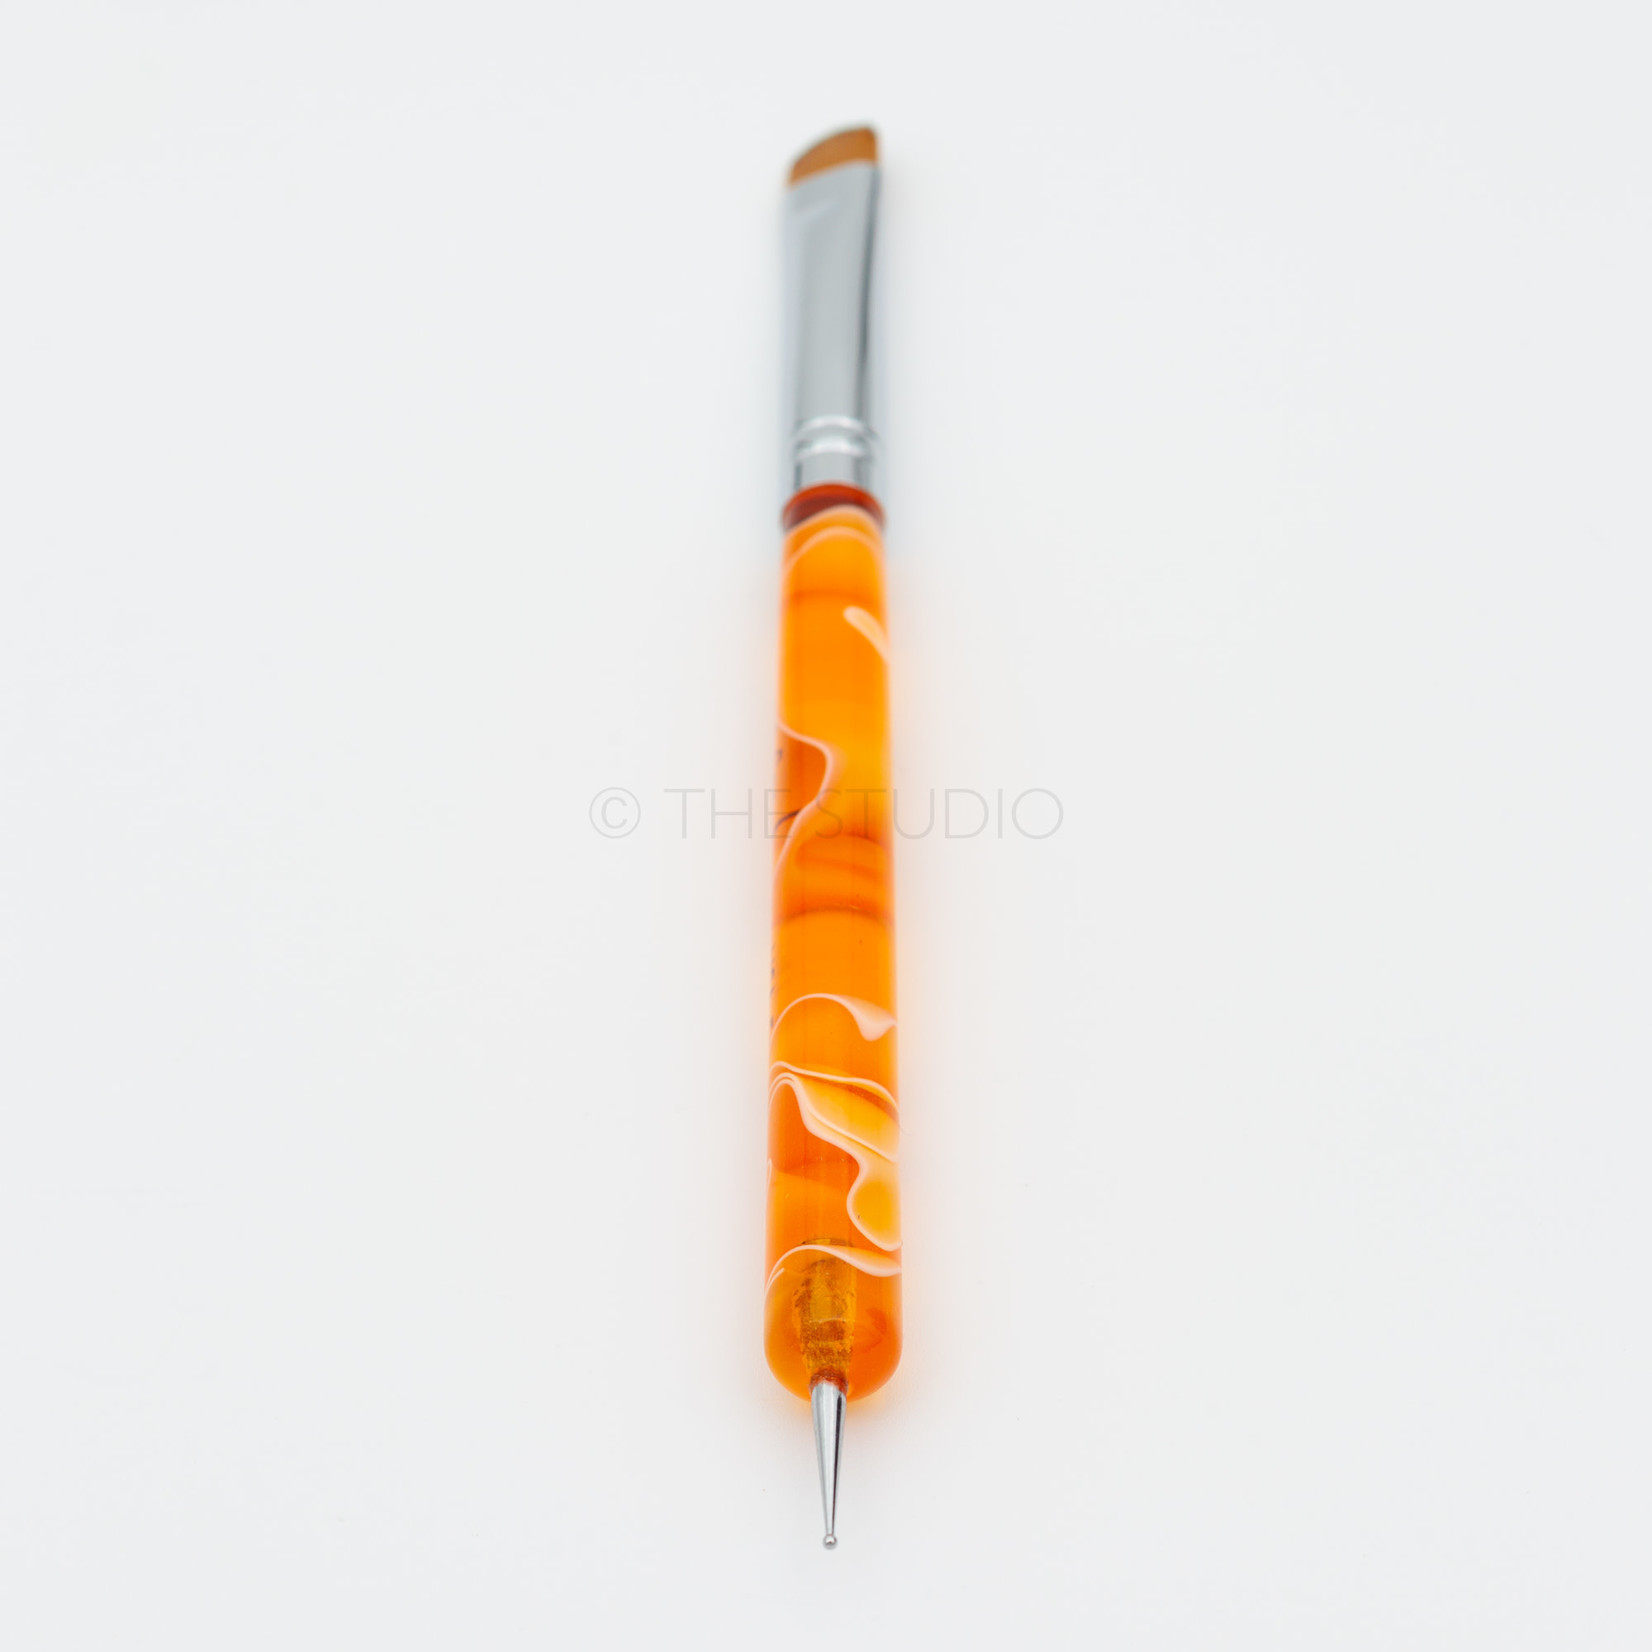 Cre8tion Cre8tion - French Brush w/ Dotting Tool - #12 Orange - 12126